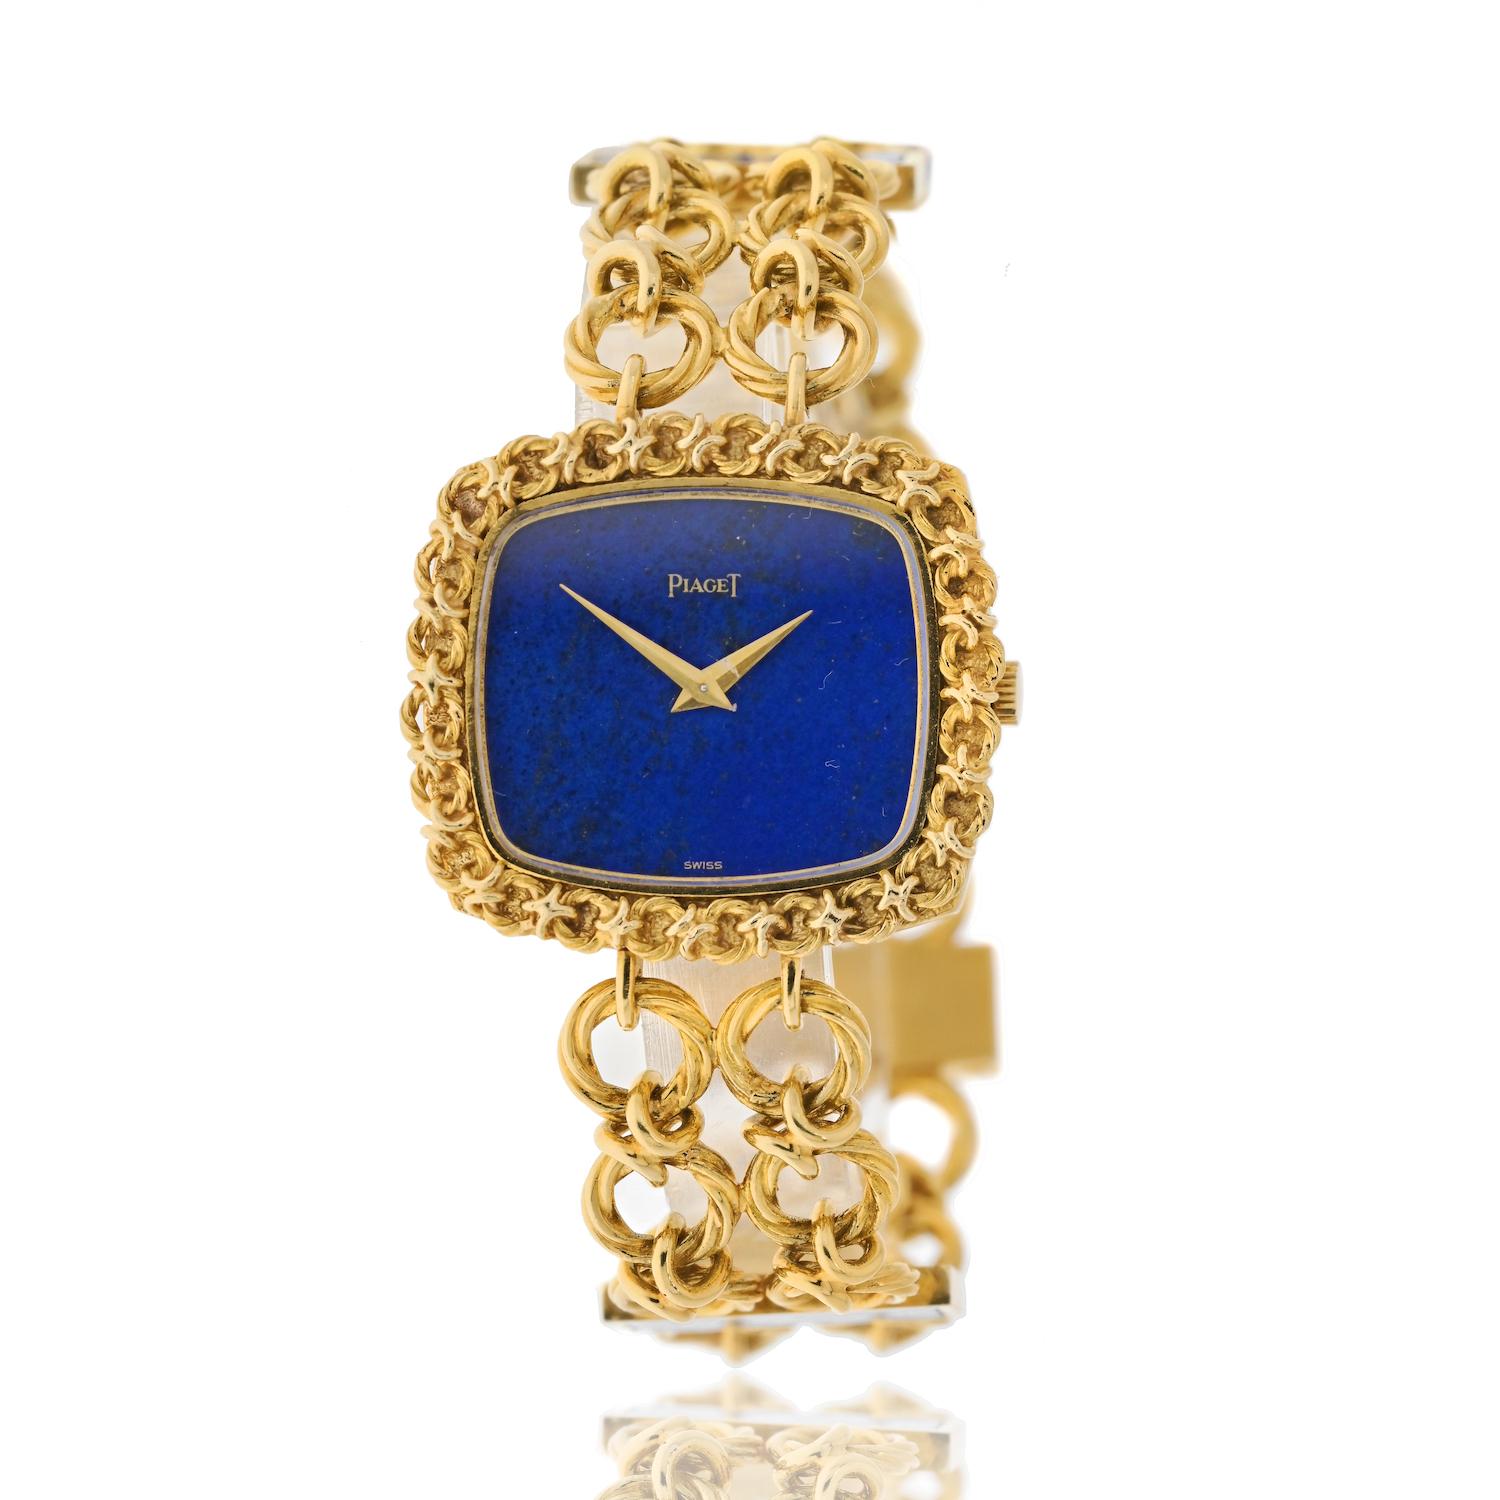 Introducing a true marvel of craftsmanship, the exquisite vintage Piaget timepiece. 

This stunning wristwatch boasts a textured gold rectangular case that exudes a sense of elegance and refinement. 

The focal point of the watch is its captivating